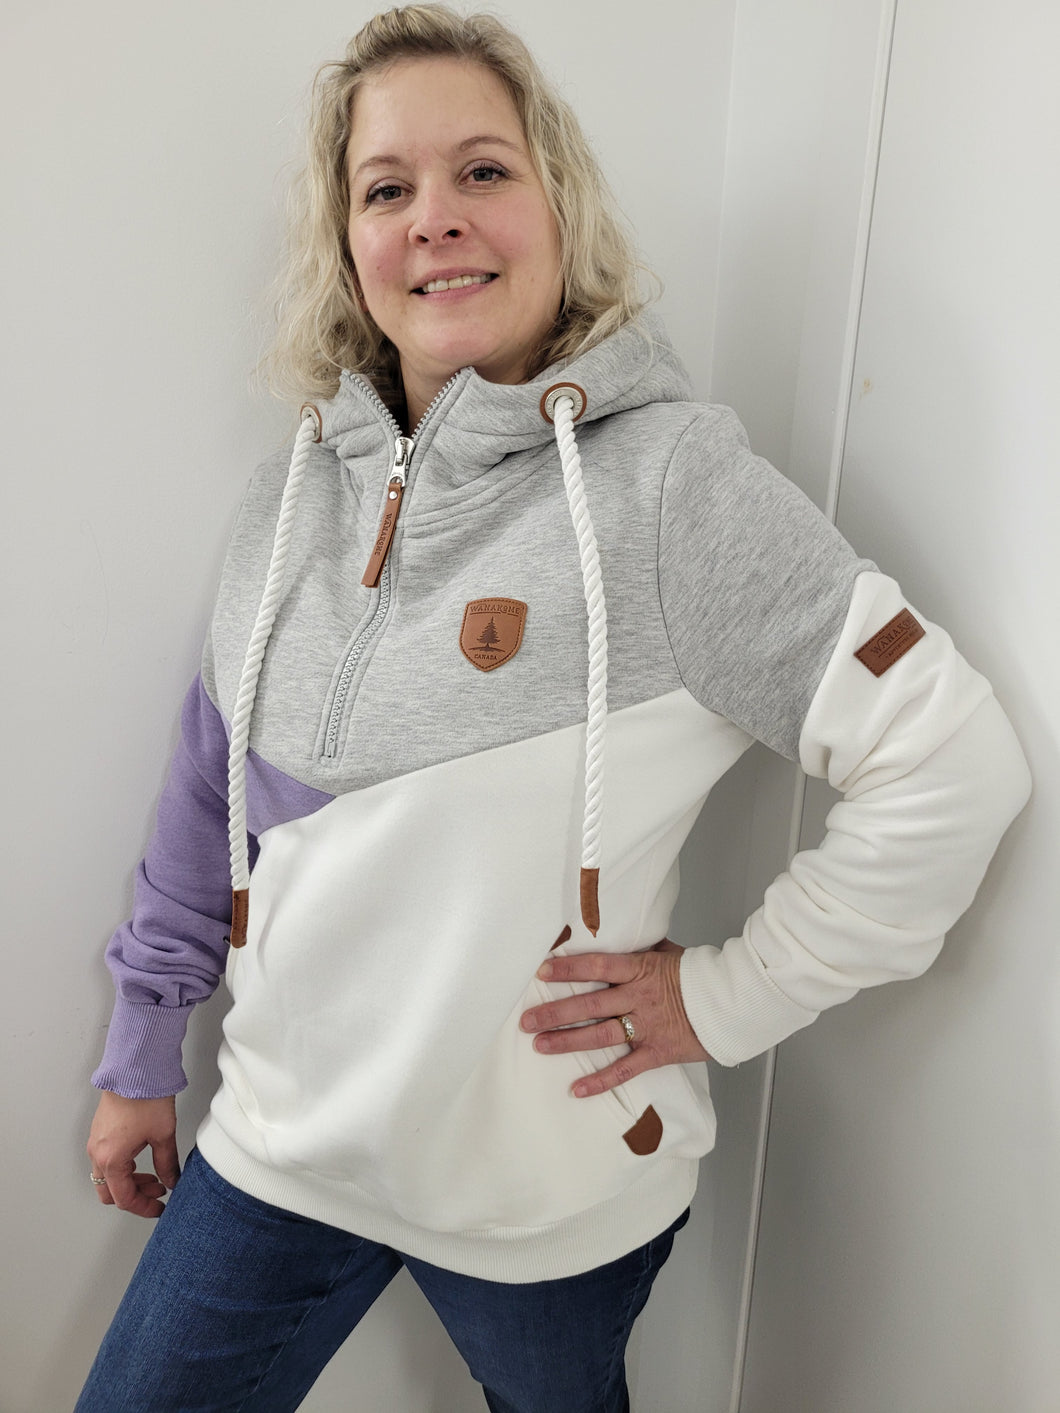 Wanakome - Roxy - Hoodie with zipper Front - Lavender Mix